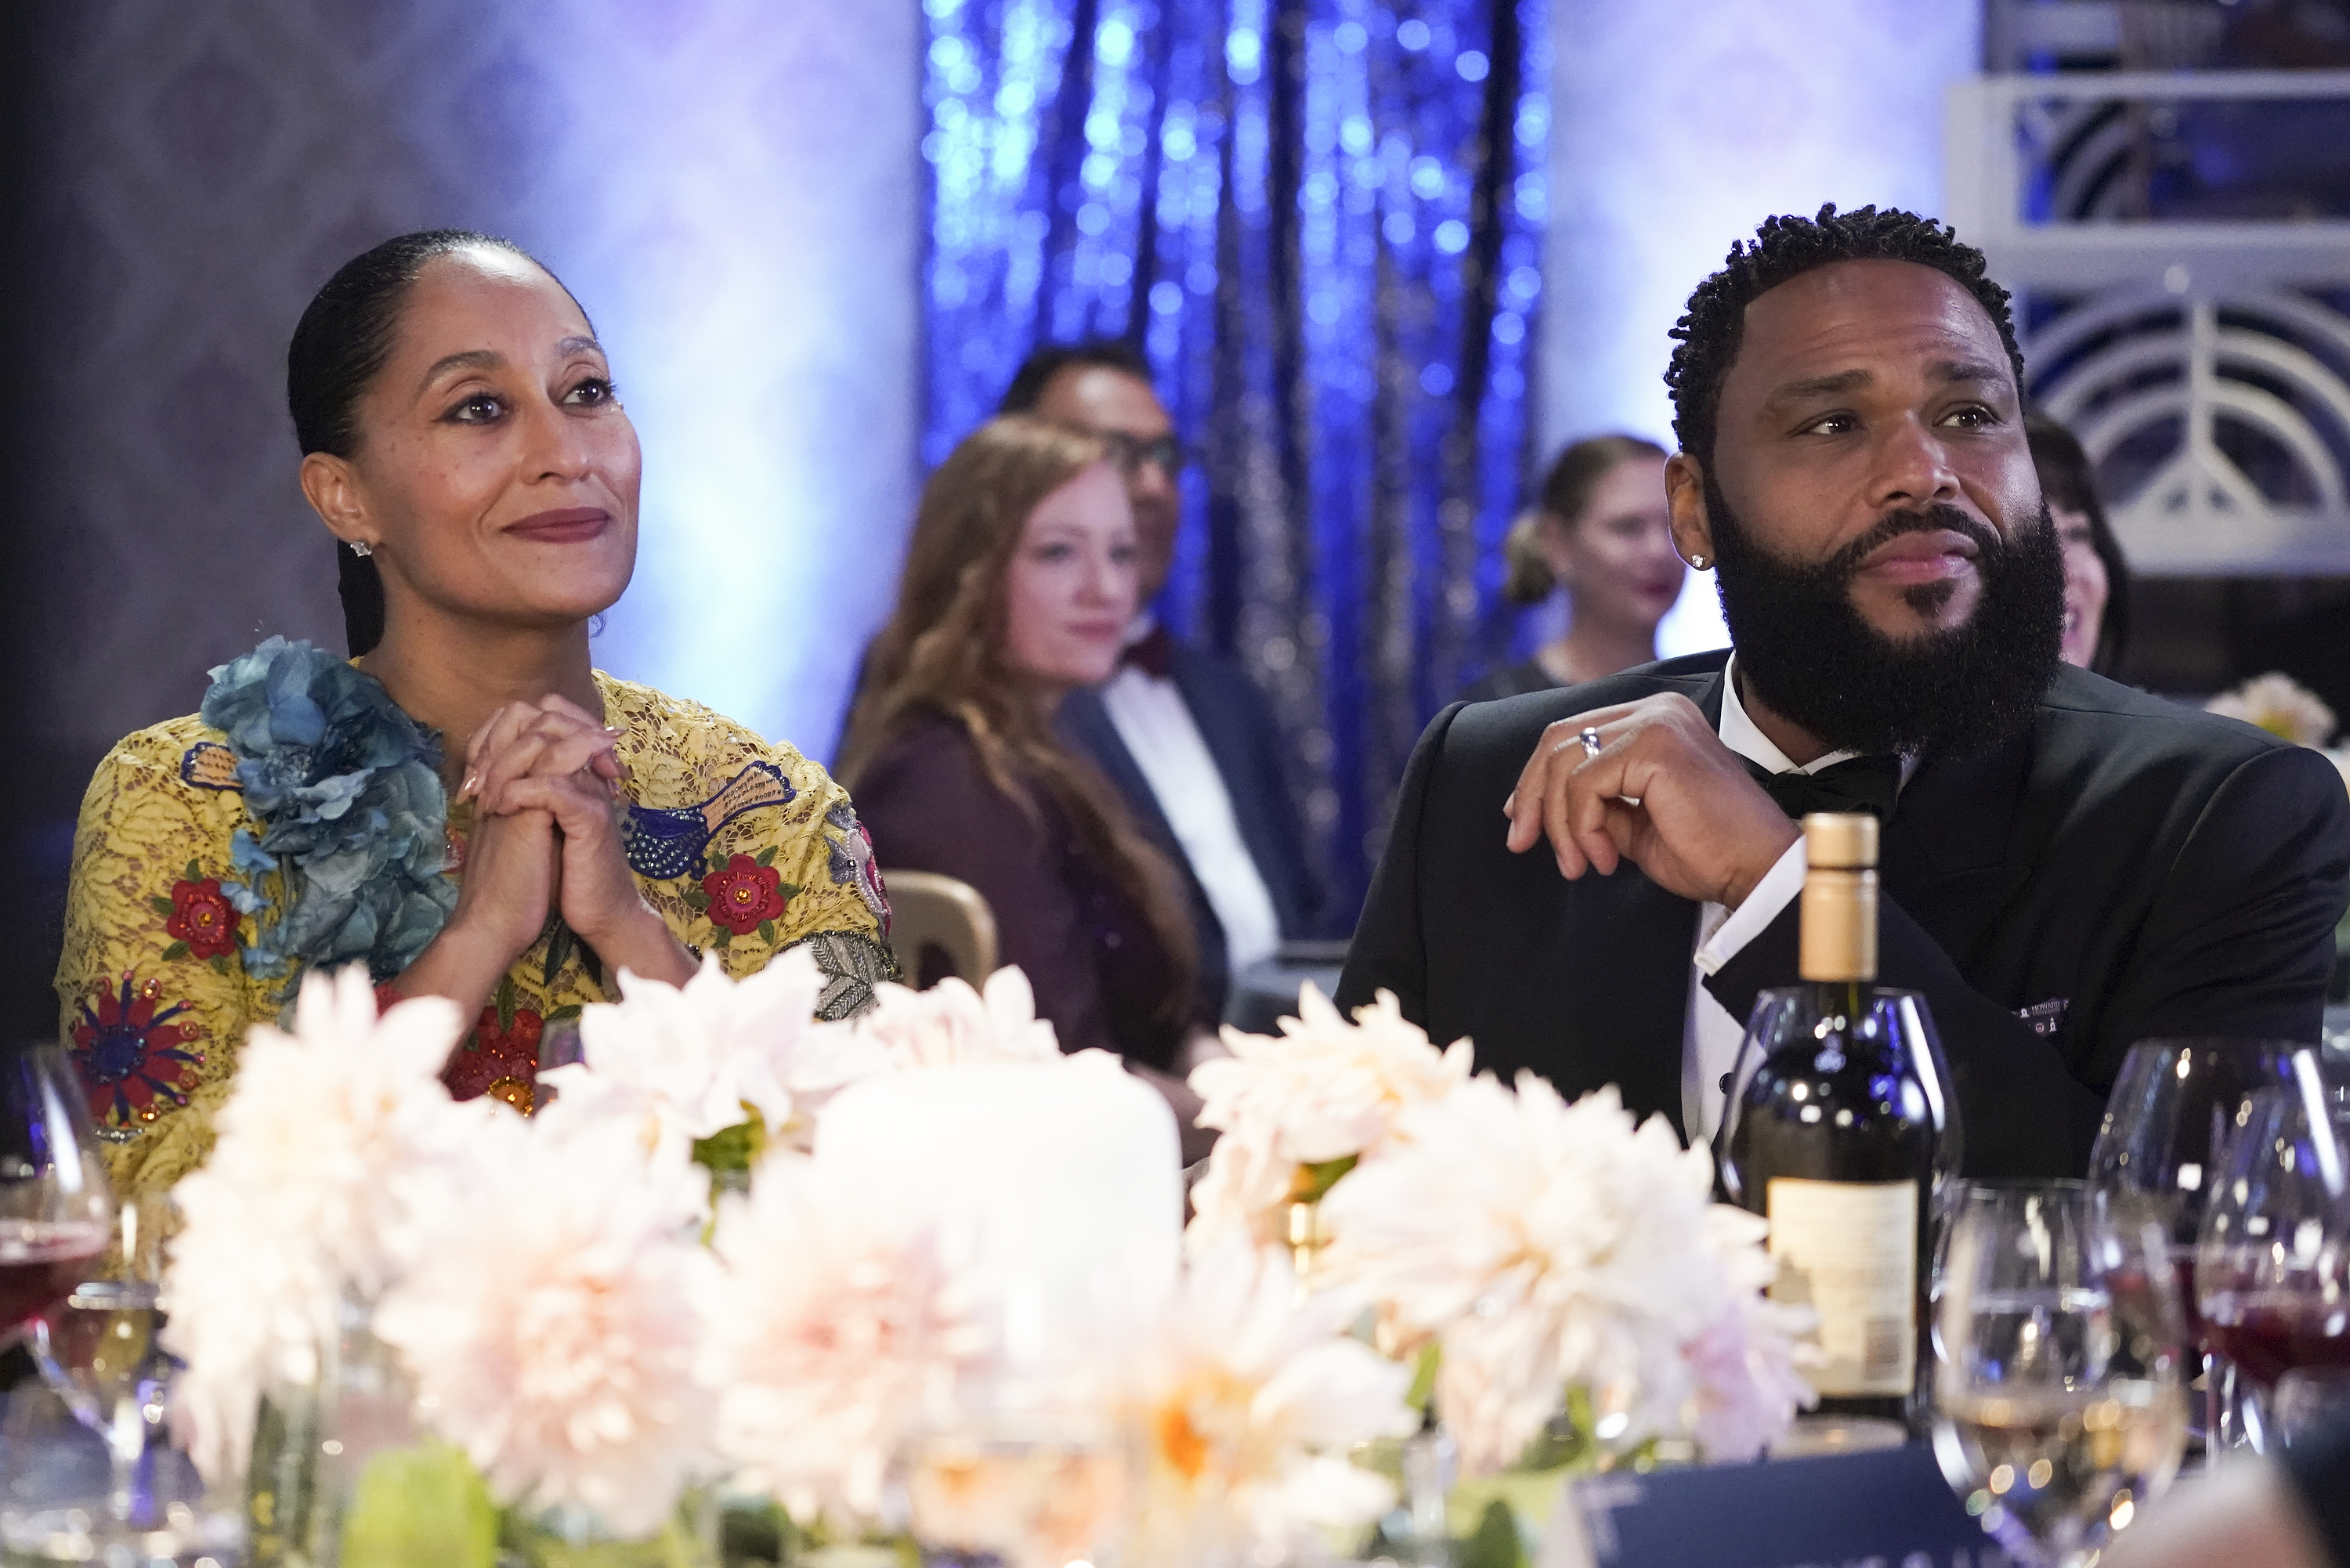 Best-bets for April 19: “Black-ish says farewell